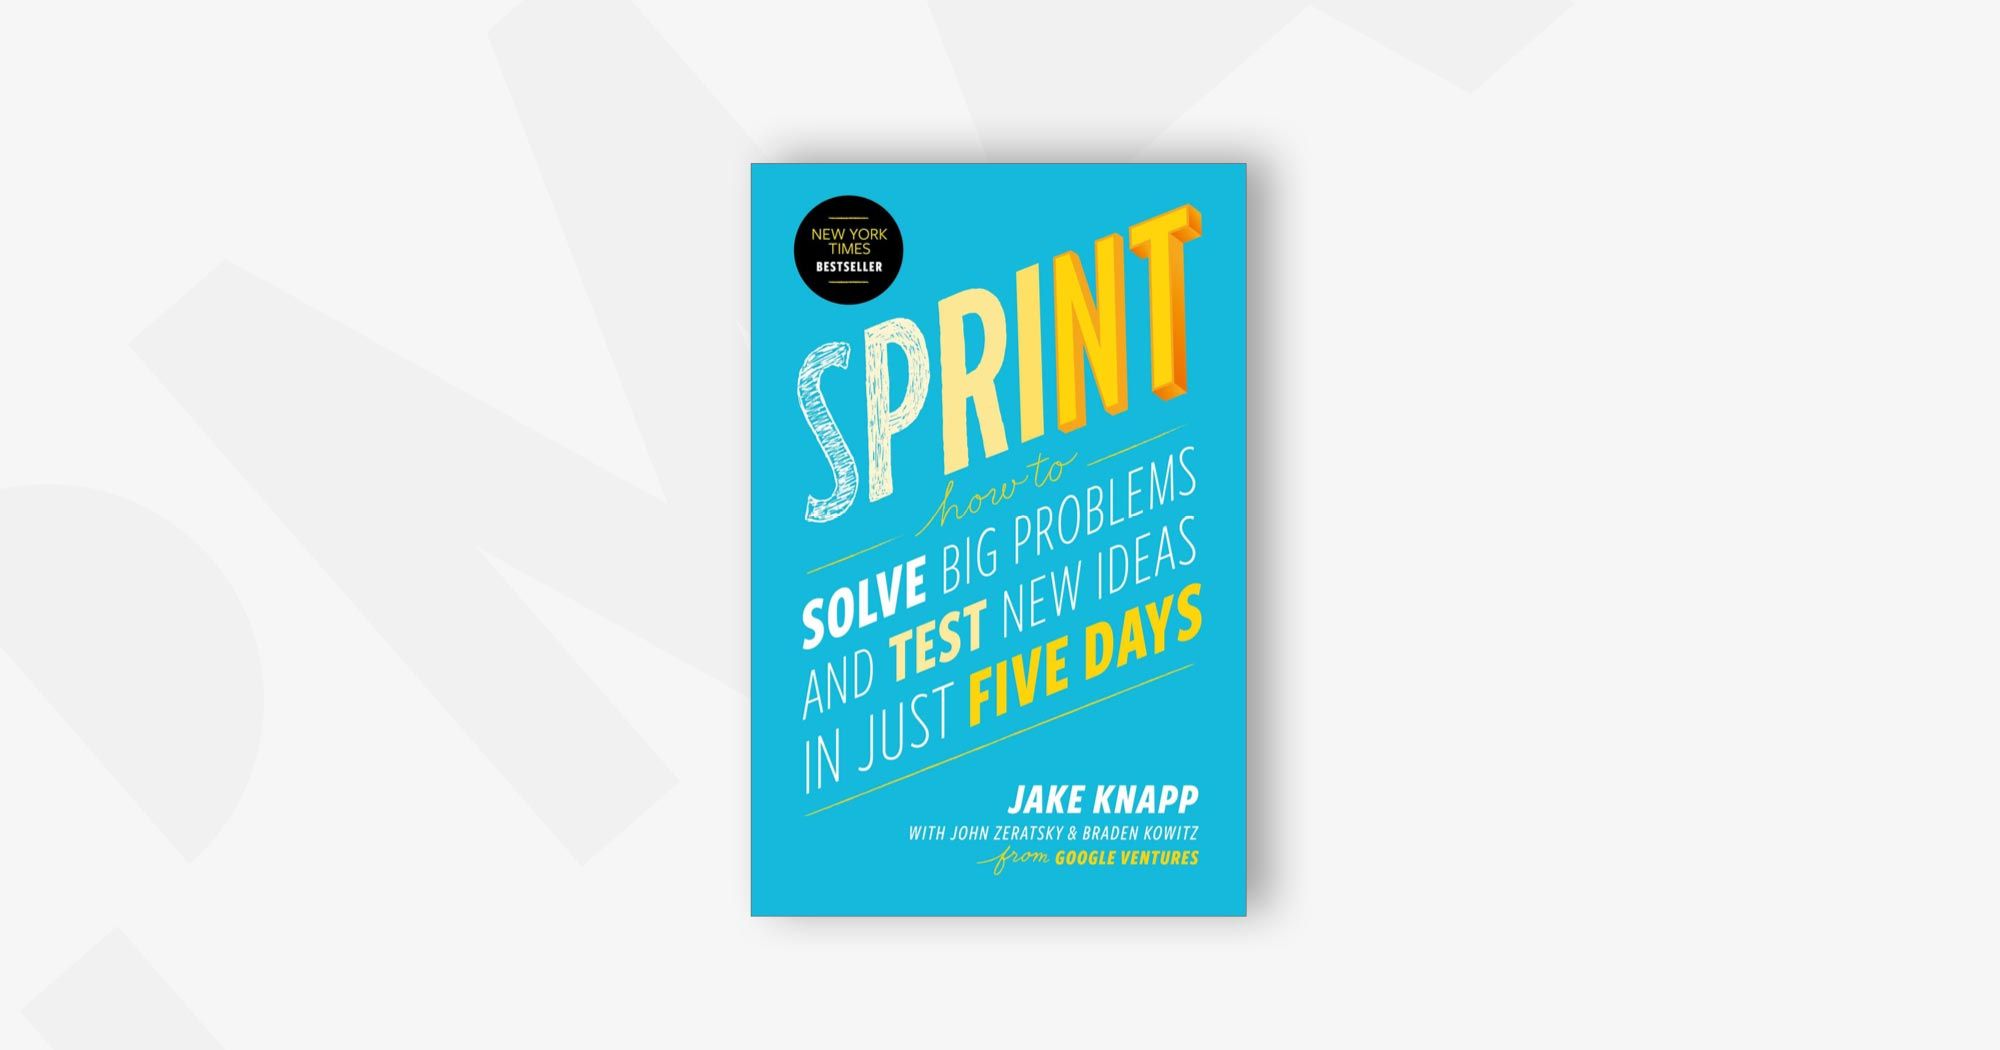 Sprint: How to Solve Big Problems and Test New Ideas in Just Five Days – Braden Kowitz, Jake Knapp, and John Zeratsky